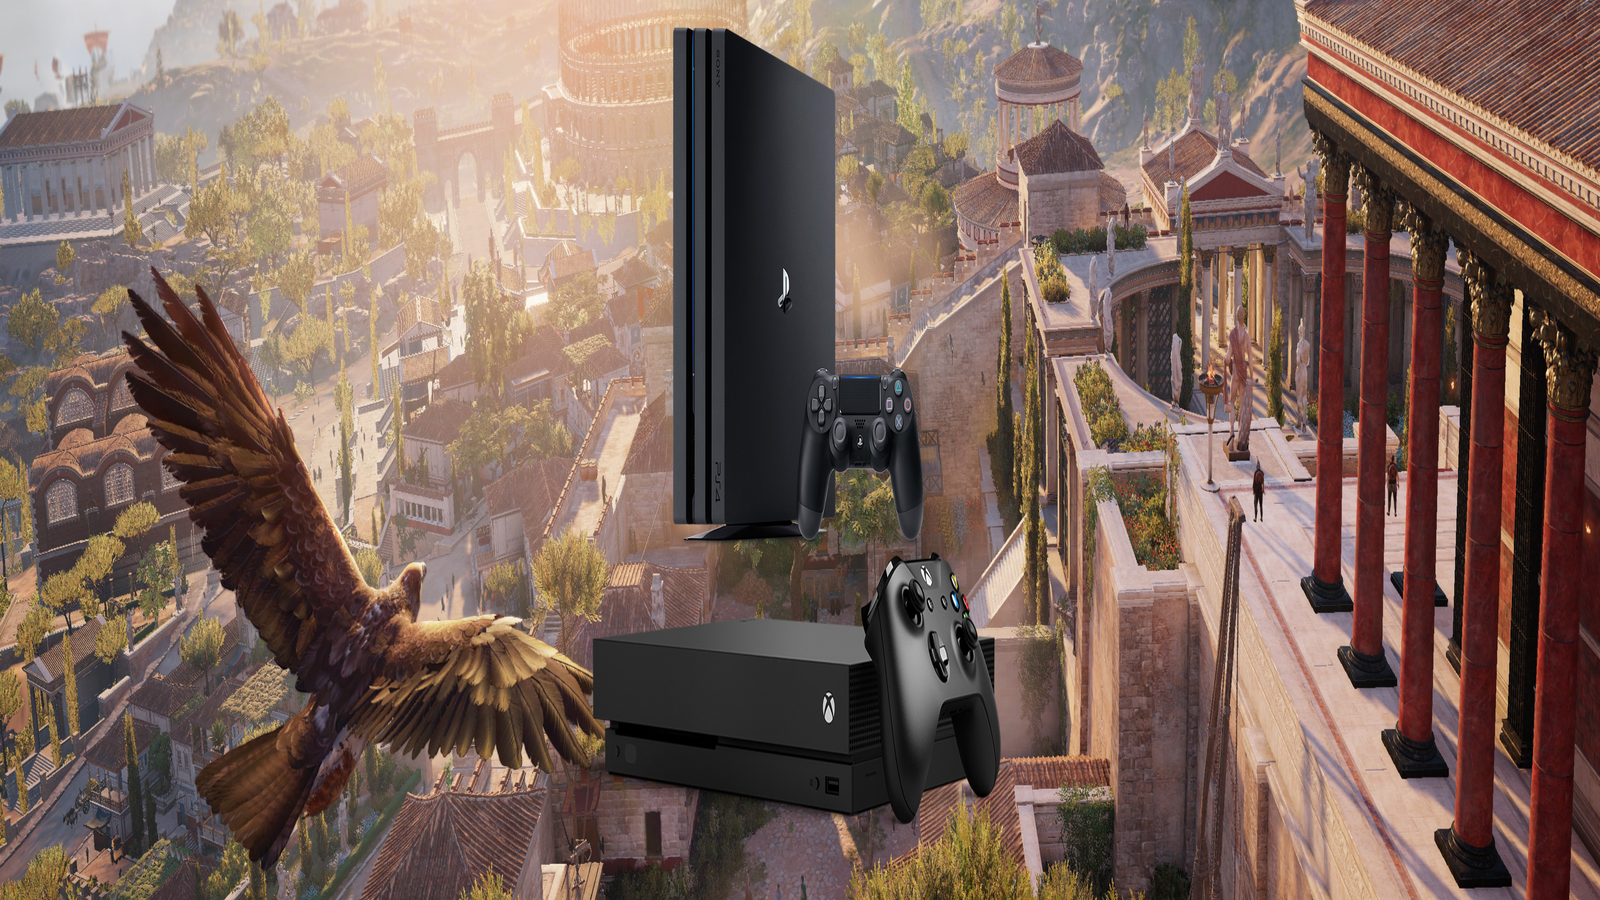 Xbox One X: Is it better than the PS4 Pro?